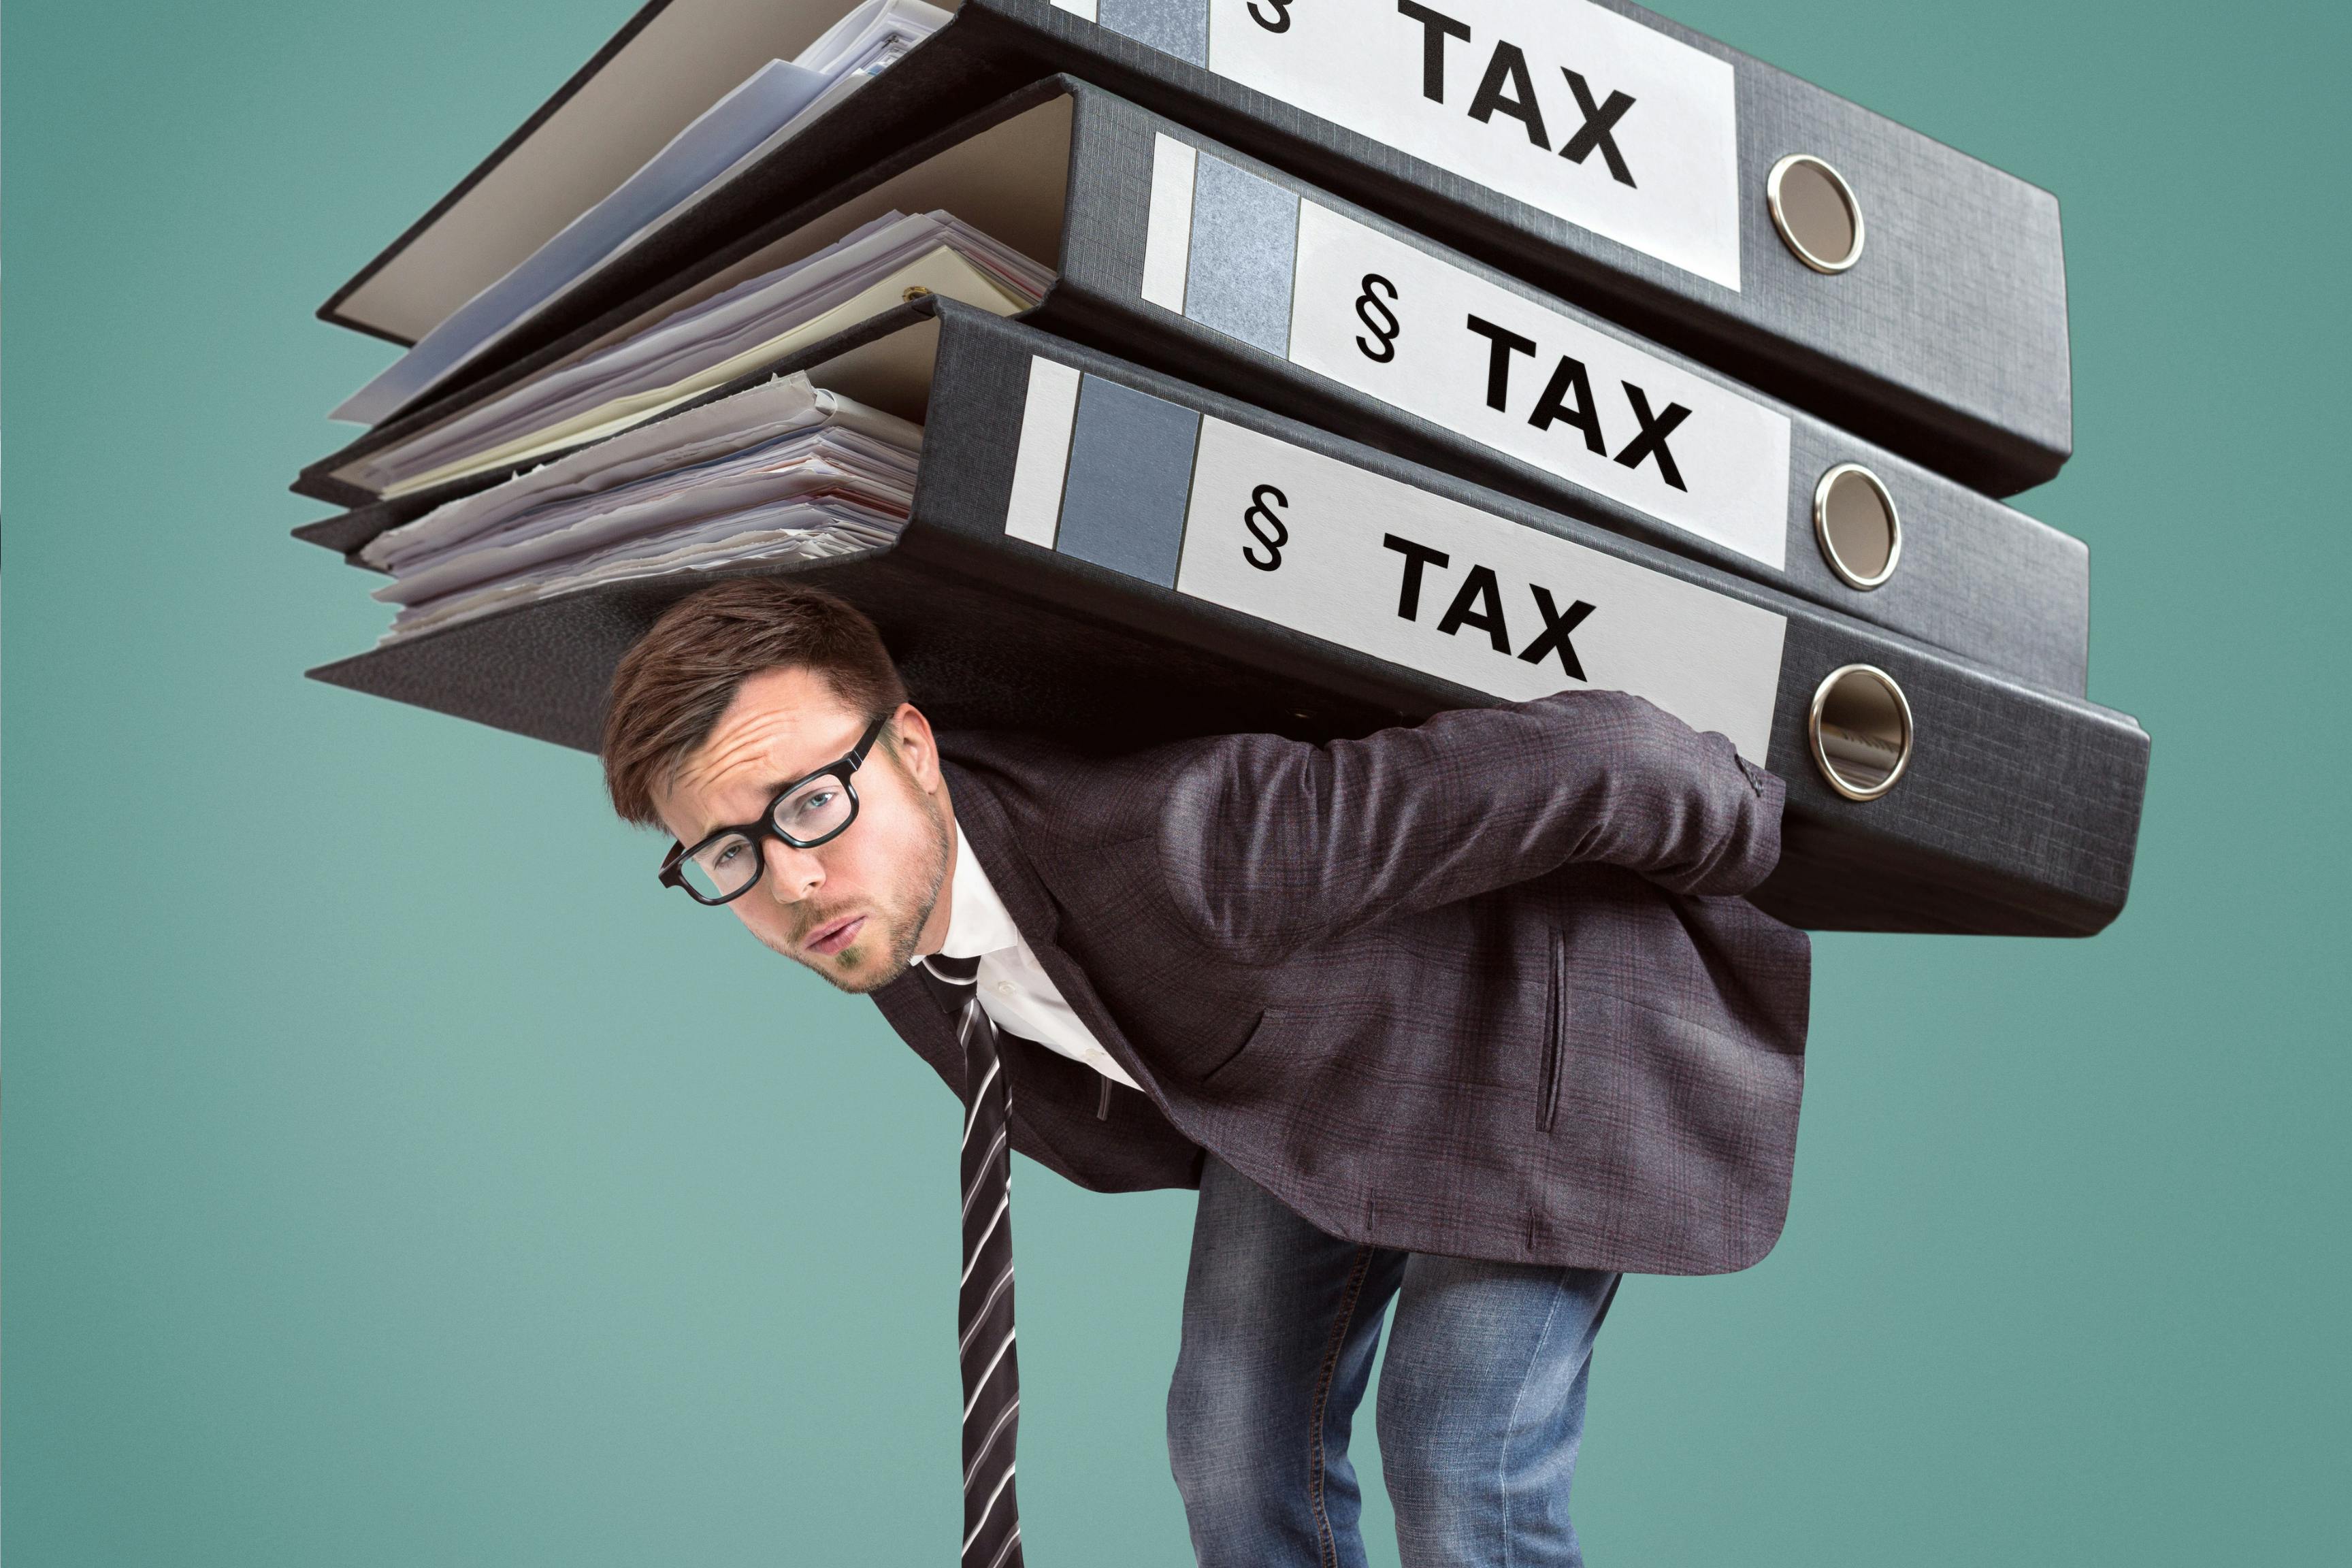 The image shows a man with glasses, wearing a white shirt, dark stripped tie, grey sportscoat and jeans. He is against a teal background and is bending over at the waist with three enormous binders full of papers on his back.  On the spine of each binder is the word Taxes.  His faces shows that he is struggling under the weight to coney the burden of 8 signs that you may be overpaying your taxes.